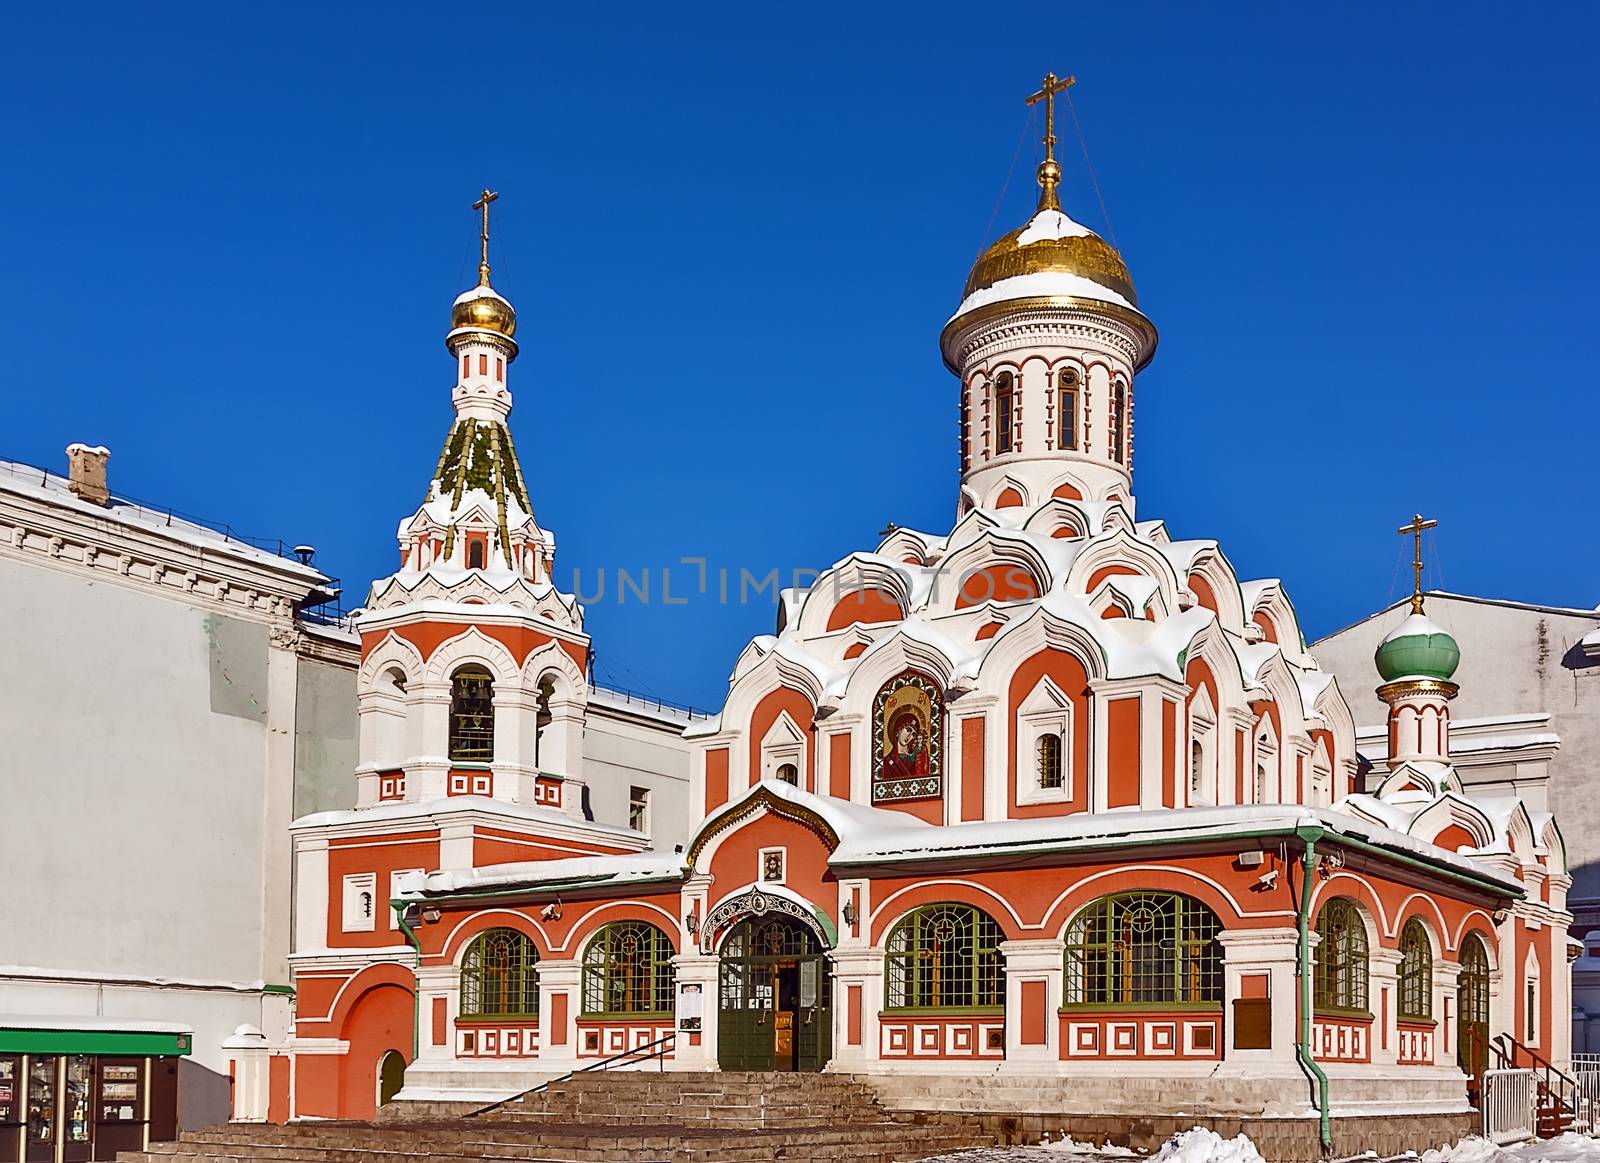 Kazan Cathedral is a Russian Orthodox church located on the northeast corner of Red Square in Moscow